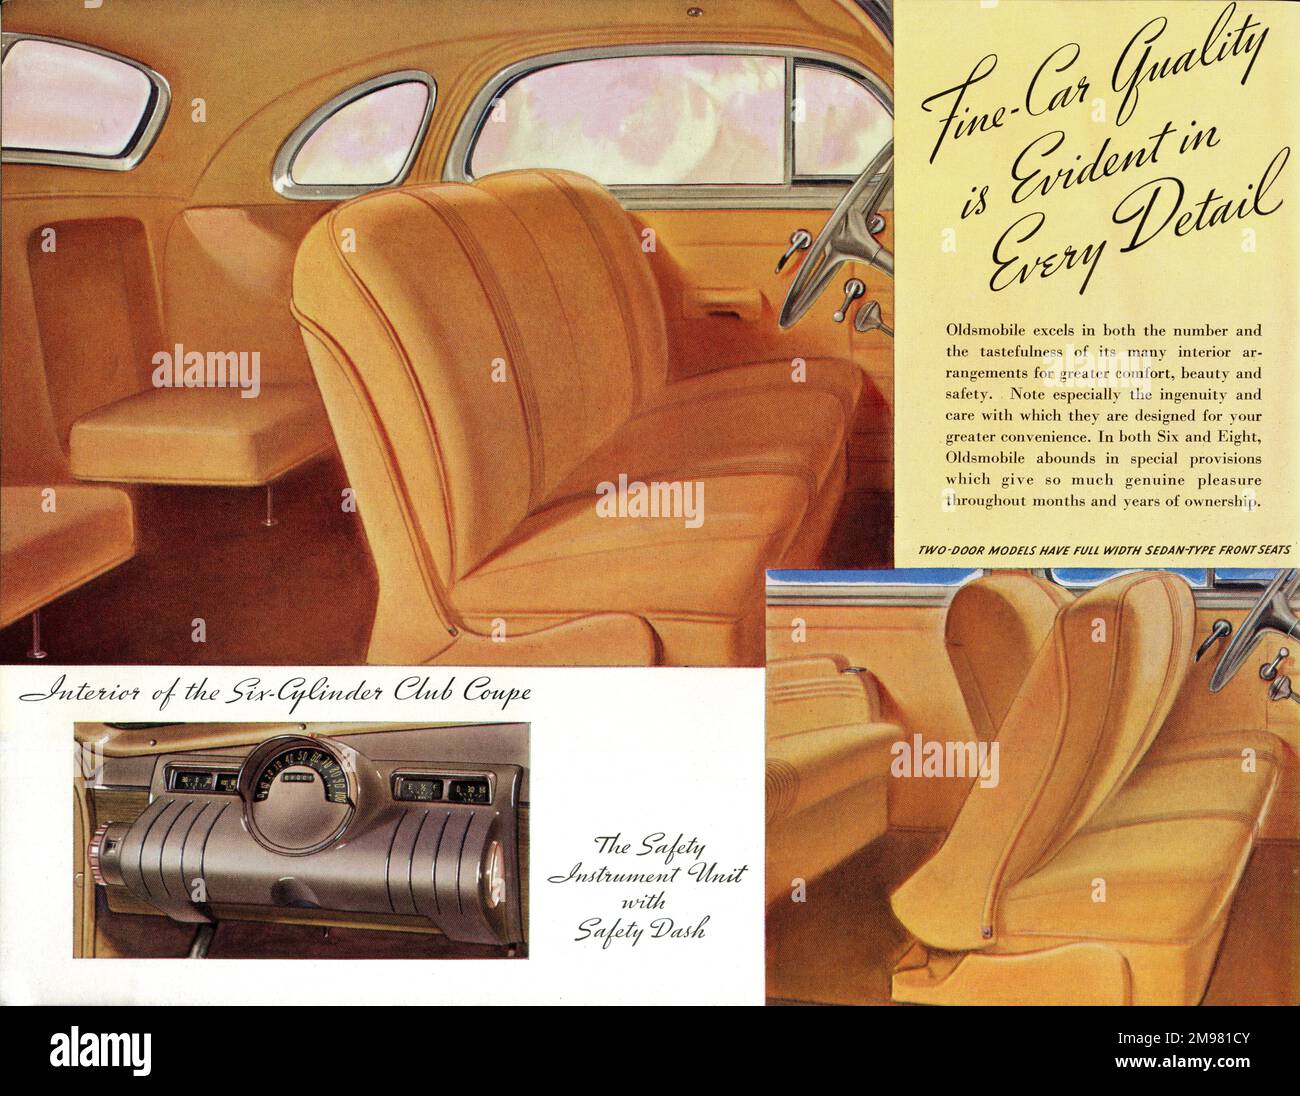 Brochure illustration, Oldsmobile car -- fine car quality is evident in every detail.  Show the interior of the six-cylinder Club Coupe, and safety instrument unit with safety dash. Stock Photo